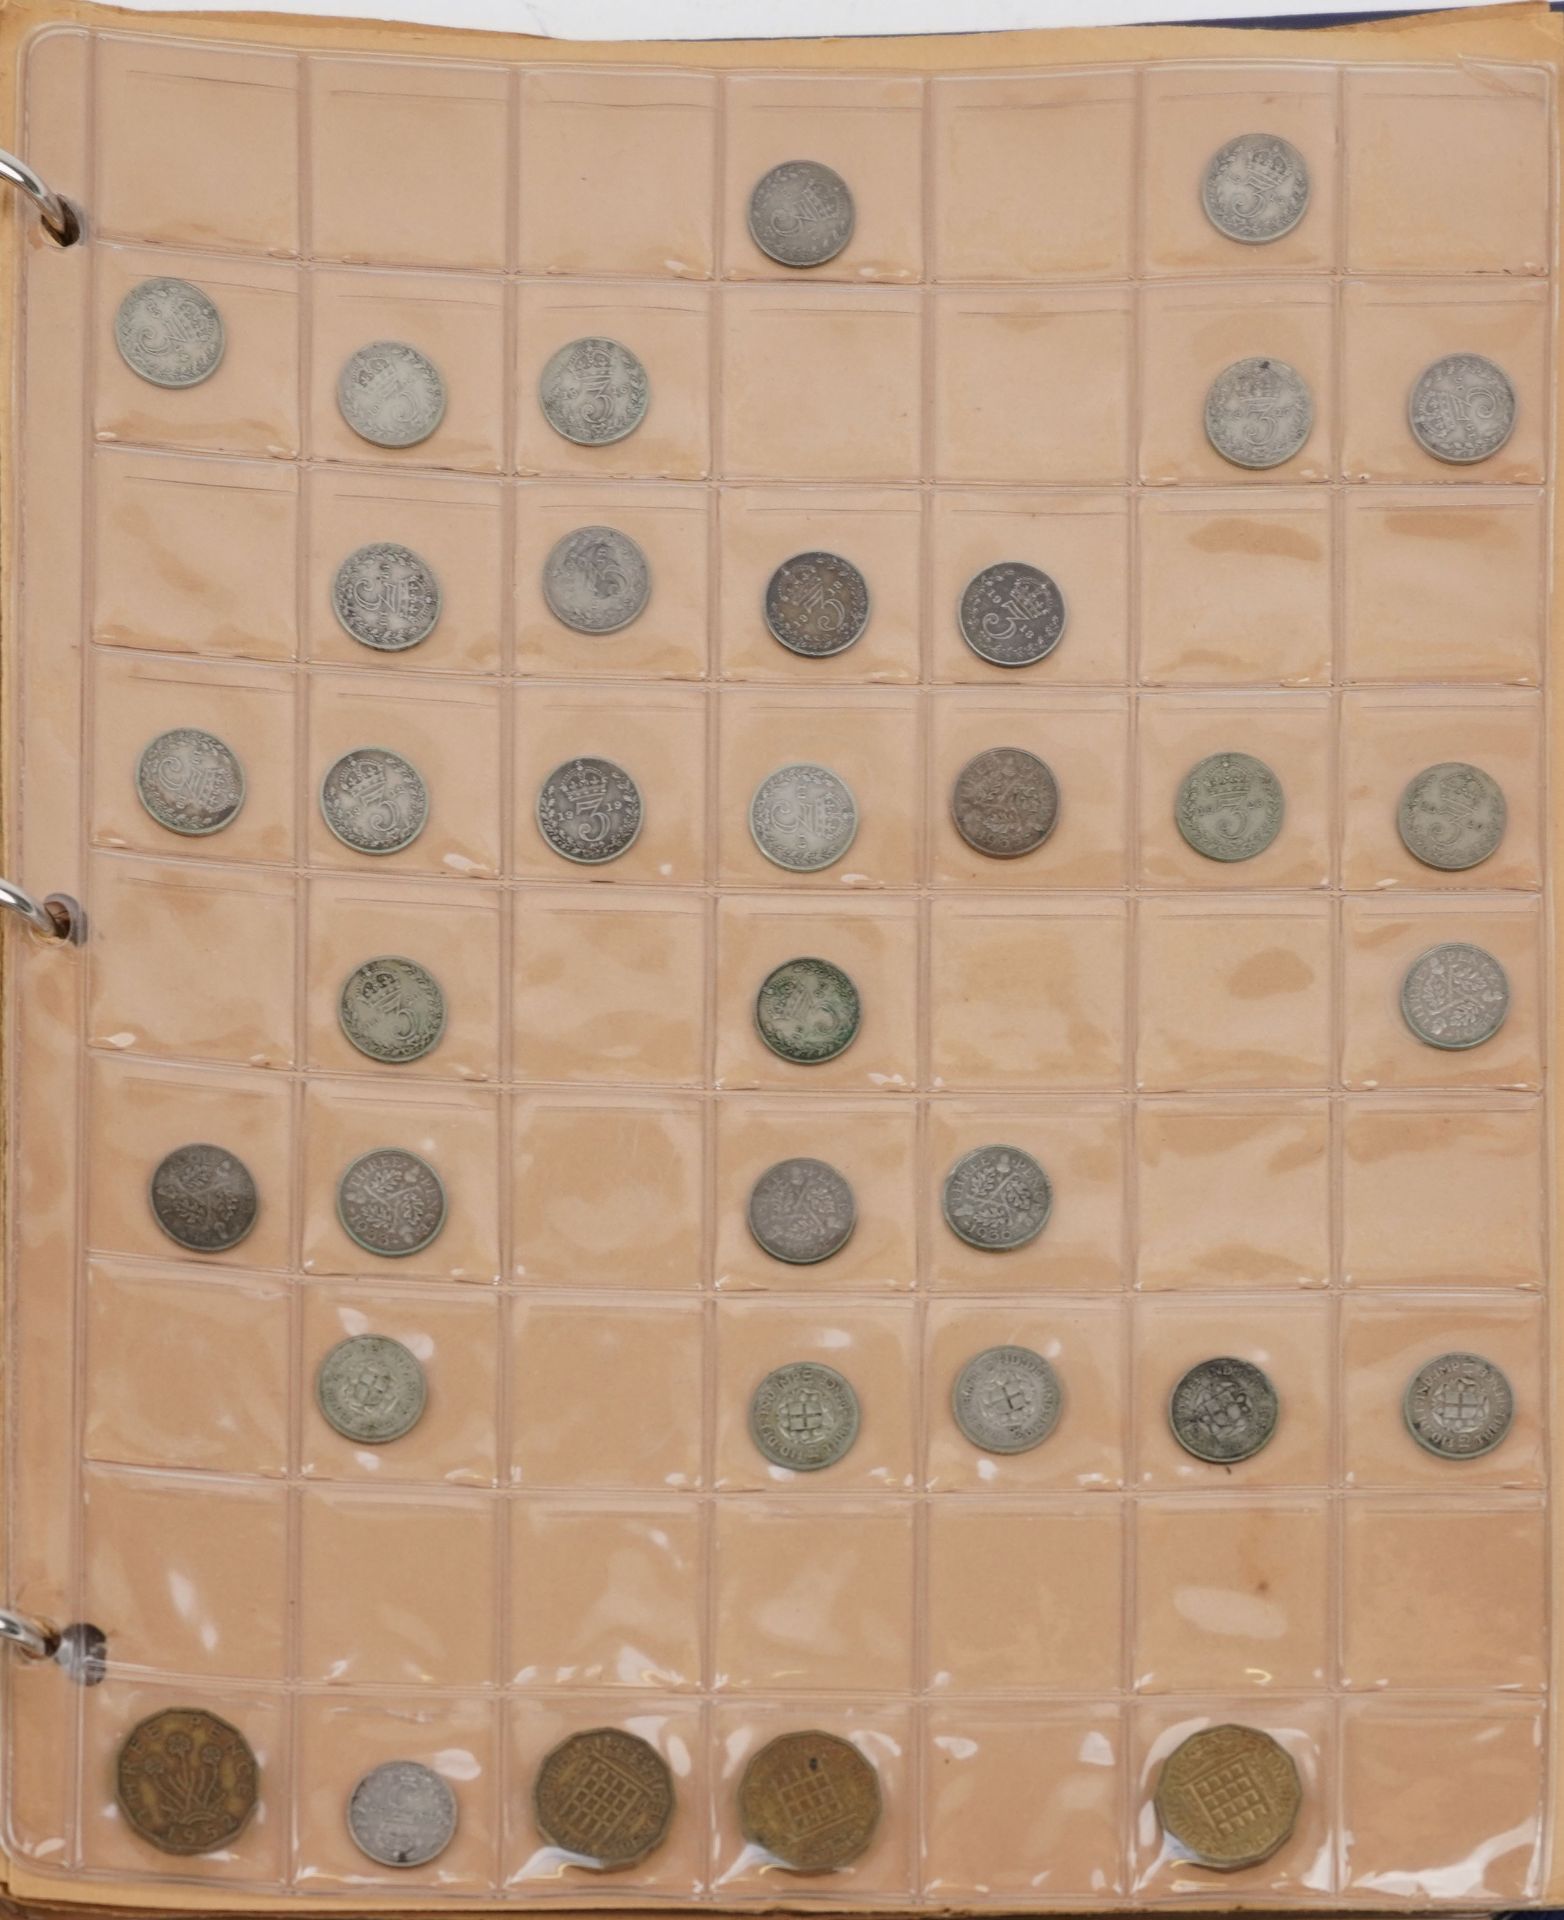 George III and later British and world coinage including tokens, pennies and shillings - Image 6 of 8